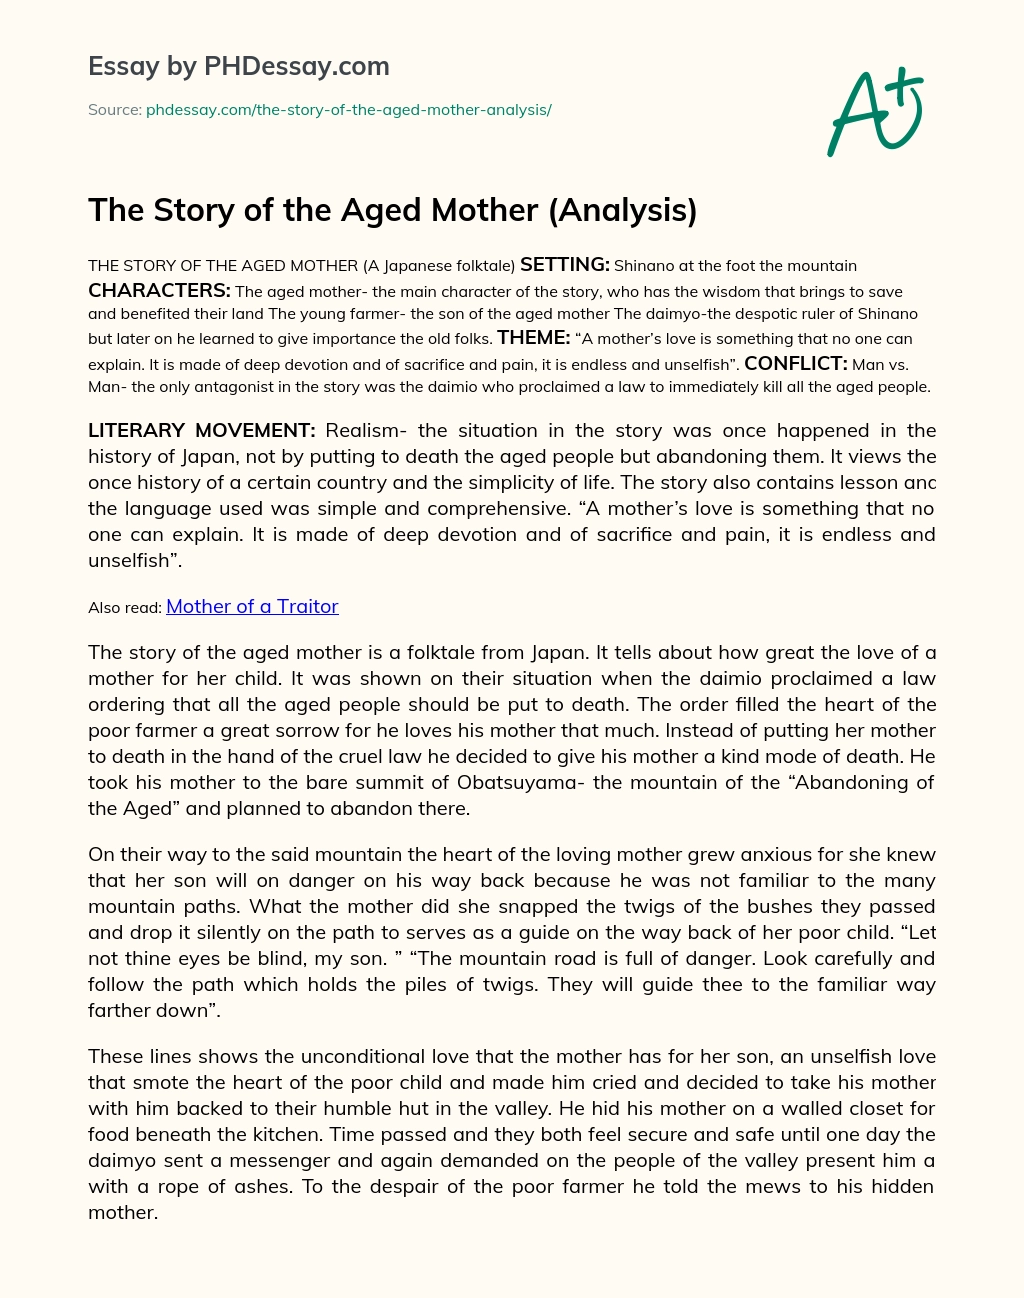 The Story of the Aged Mother (Analysis) essay